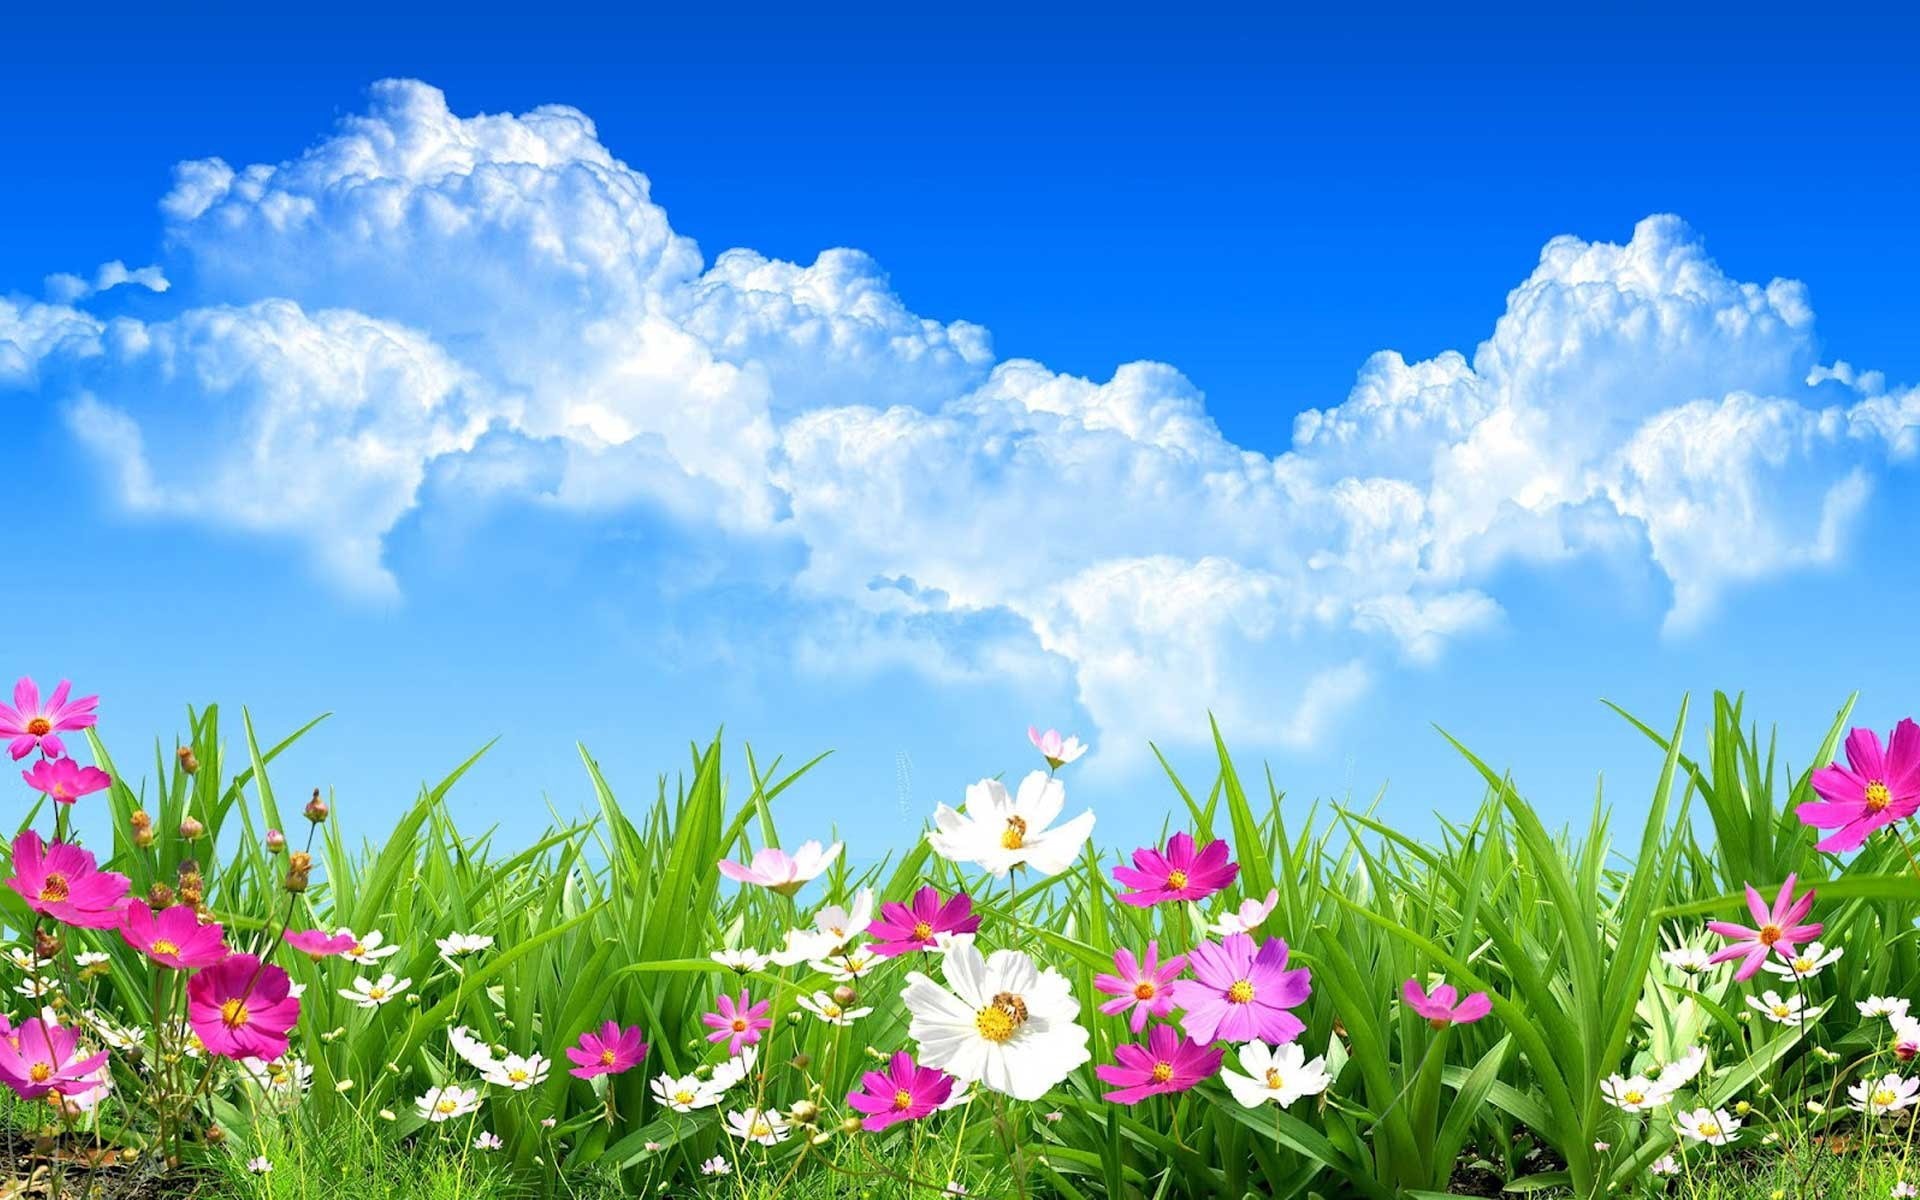 spring HD 1080p high quality 1080P, 2k, 4k Full HD Wallpaper, Background Free Download